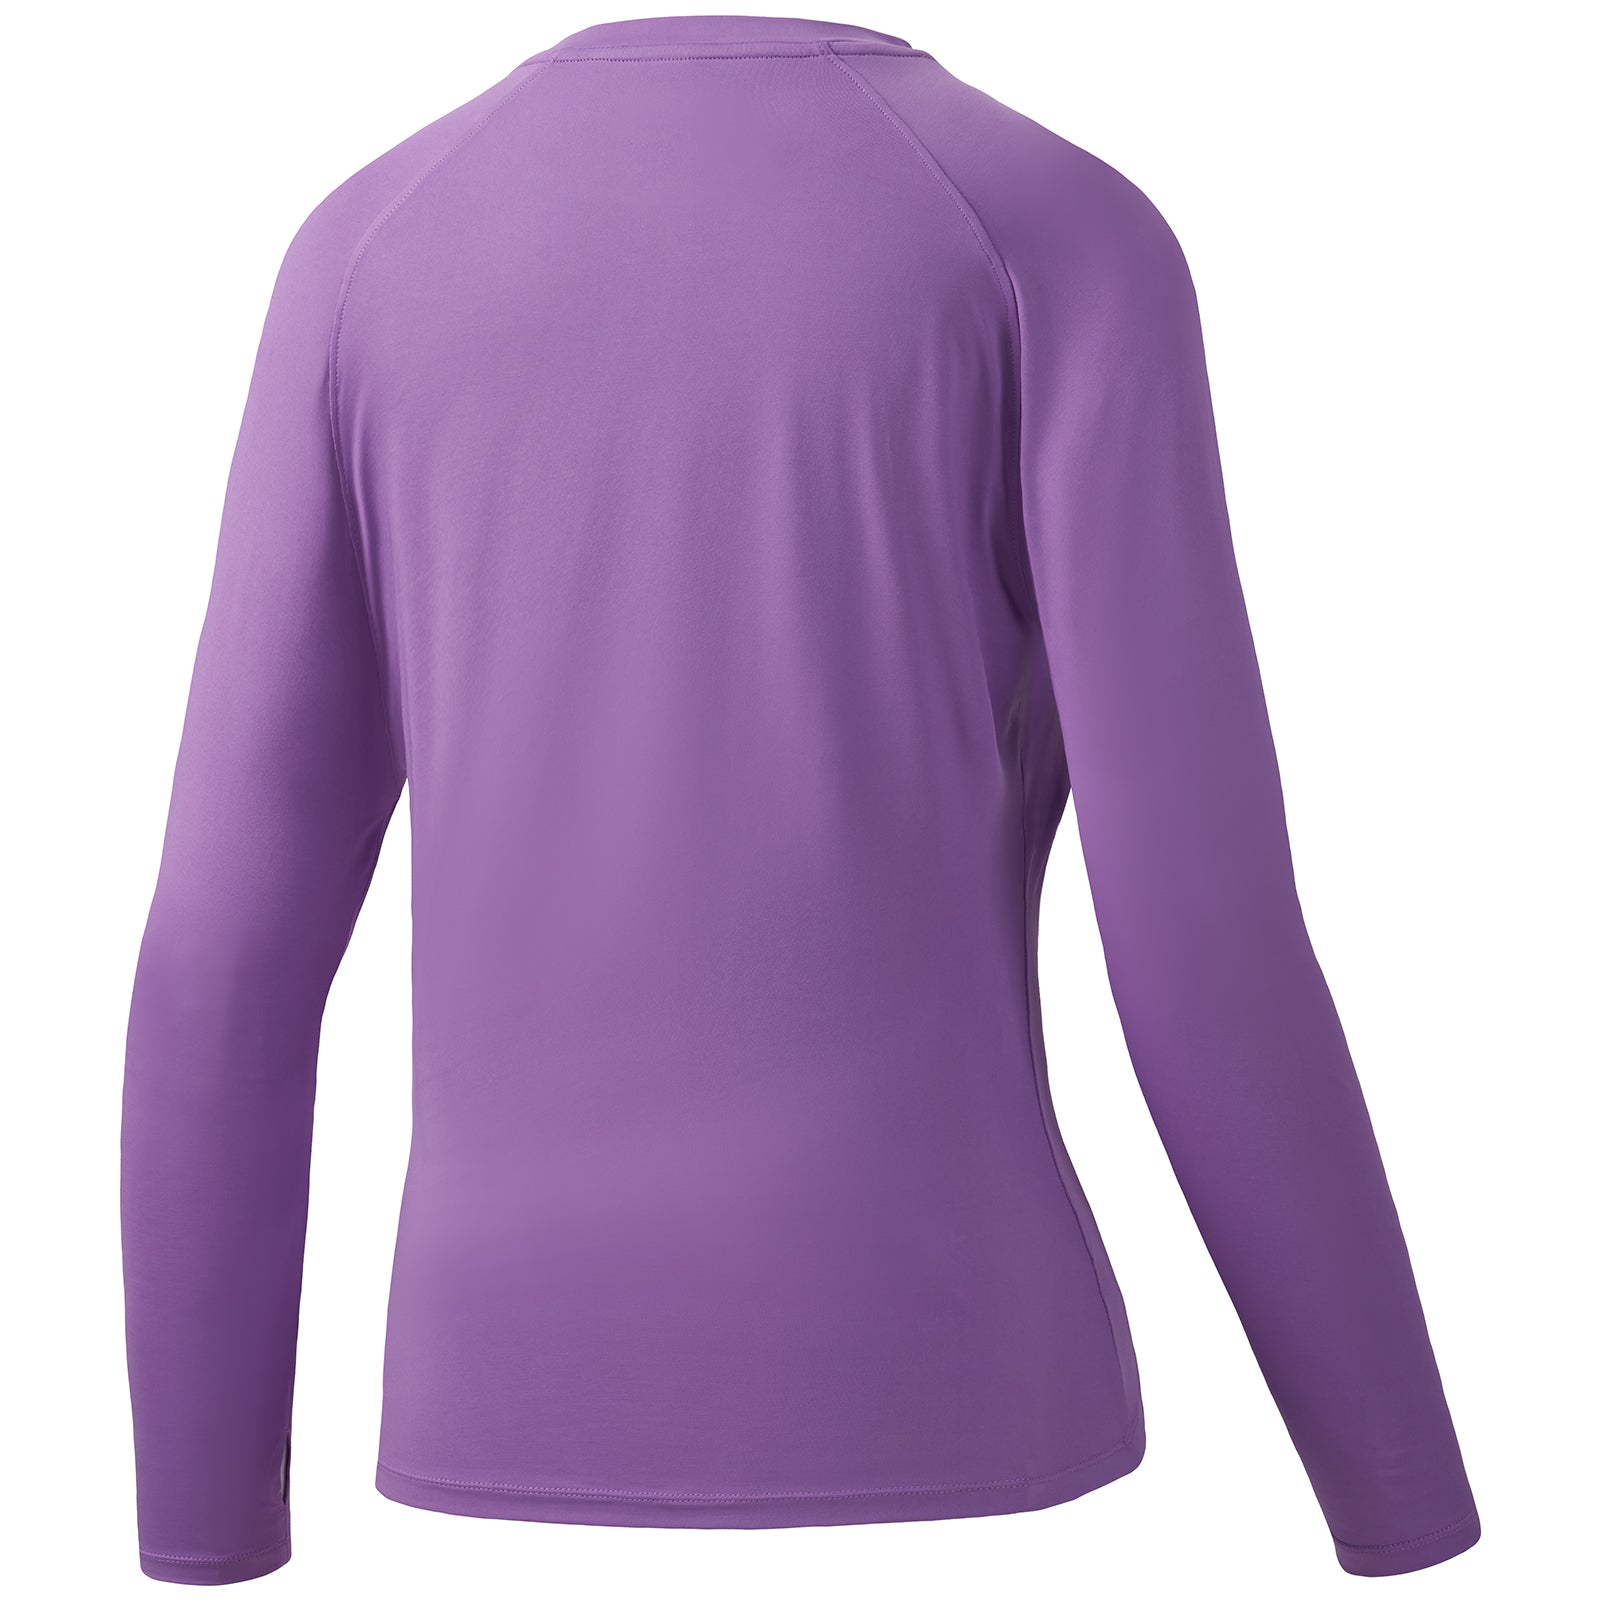 Lilac Jellyfish UPF50+ Sun Protective Long Sleeve Shirt | Shapeshifter Fish and Friends Ladies X-Large V-Neck